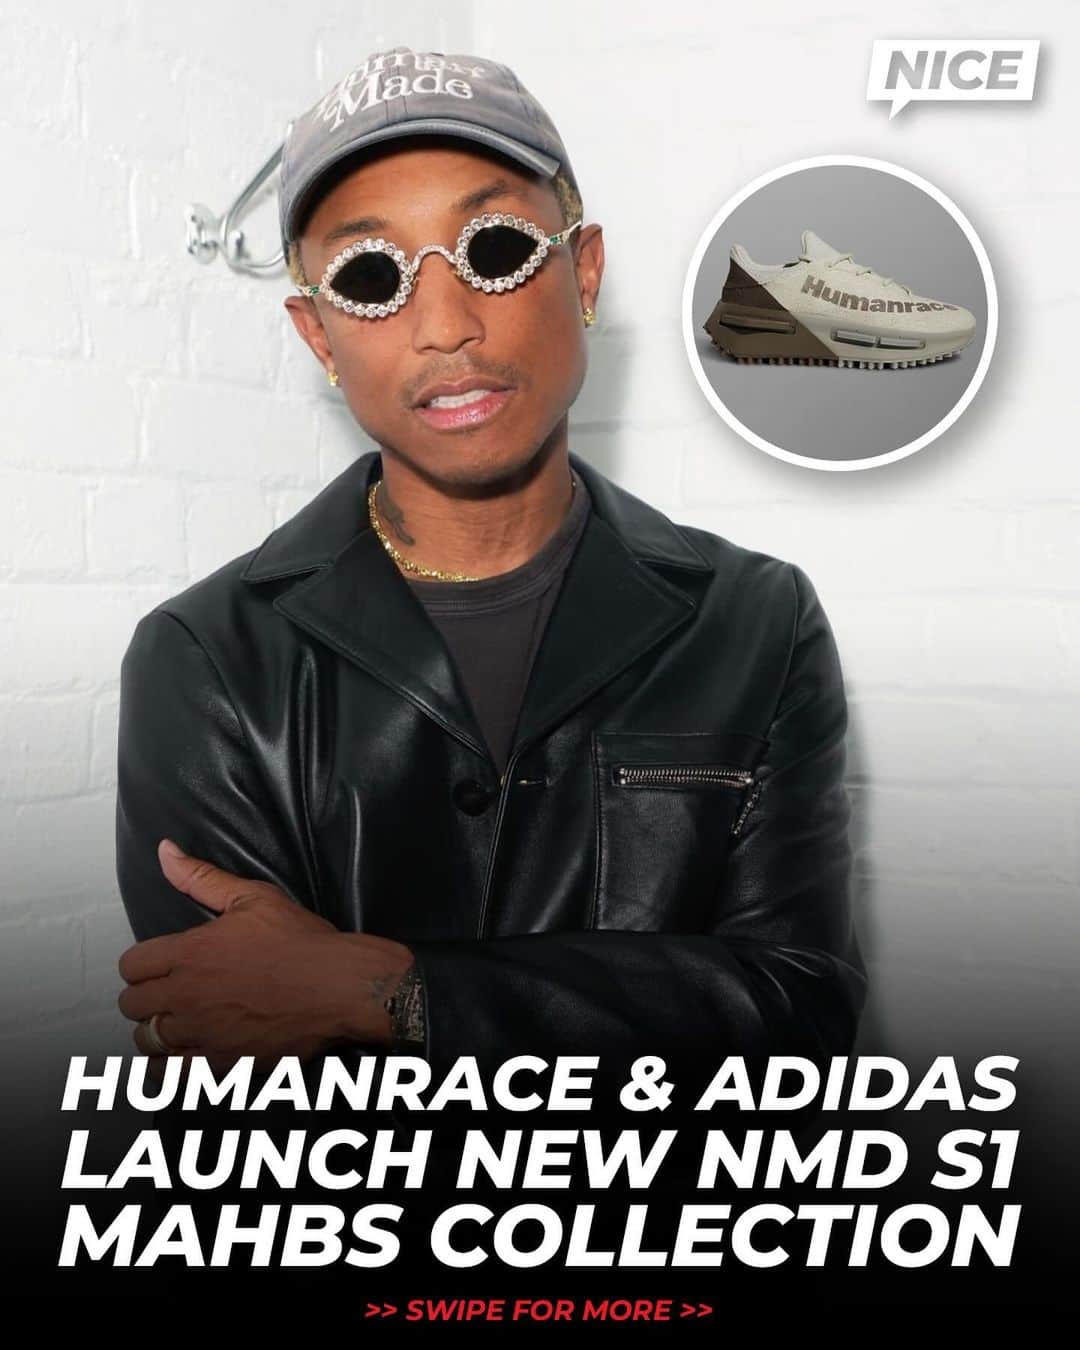 Nice Kicksのインスタグラム：「Pharrell’s Humanrace and adidas unveil the new NMD S1 MAHBS collection inspired by his worldwide travels 🗺️🌎  The collection is made up of five new colorways: Mint, Cacao, Pink Sea Salt, and a tonal Oatmeal version. The fifth colorway will be a Friends & Family pair in Humanrace Green 🔥  @nicedrops: 11/27 for $230 🗓️ LINK IN BIO for more info 📲」